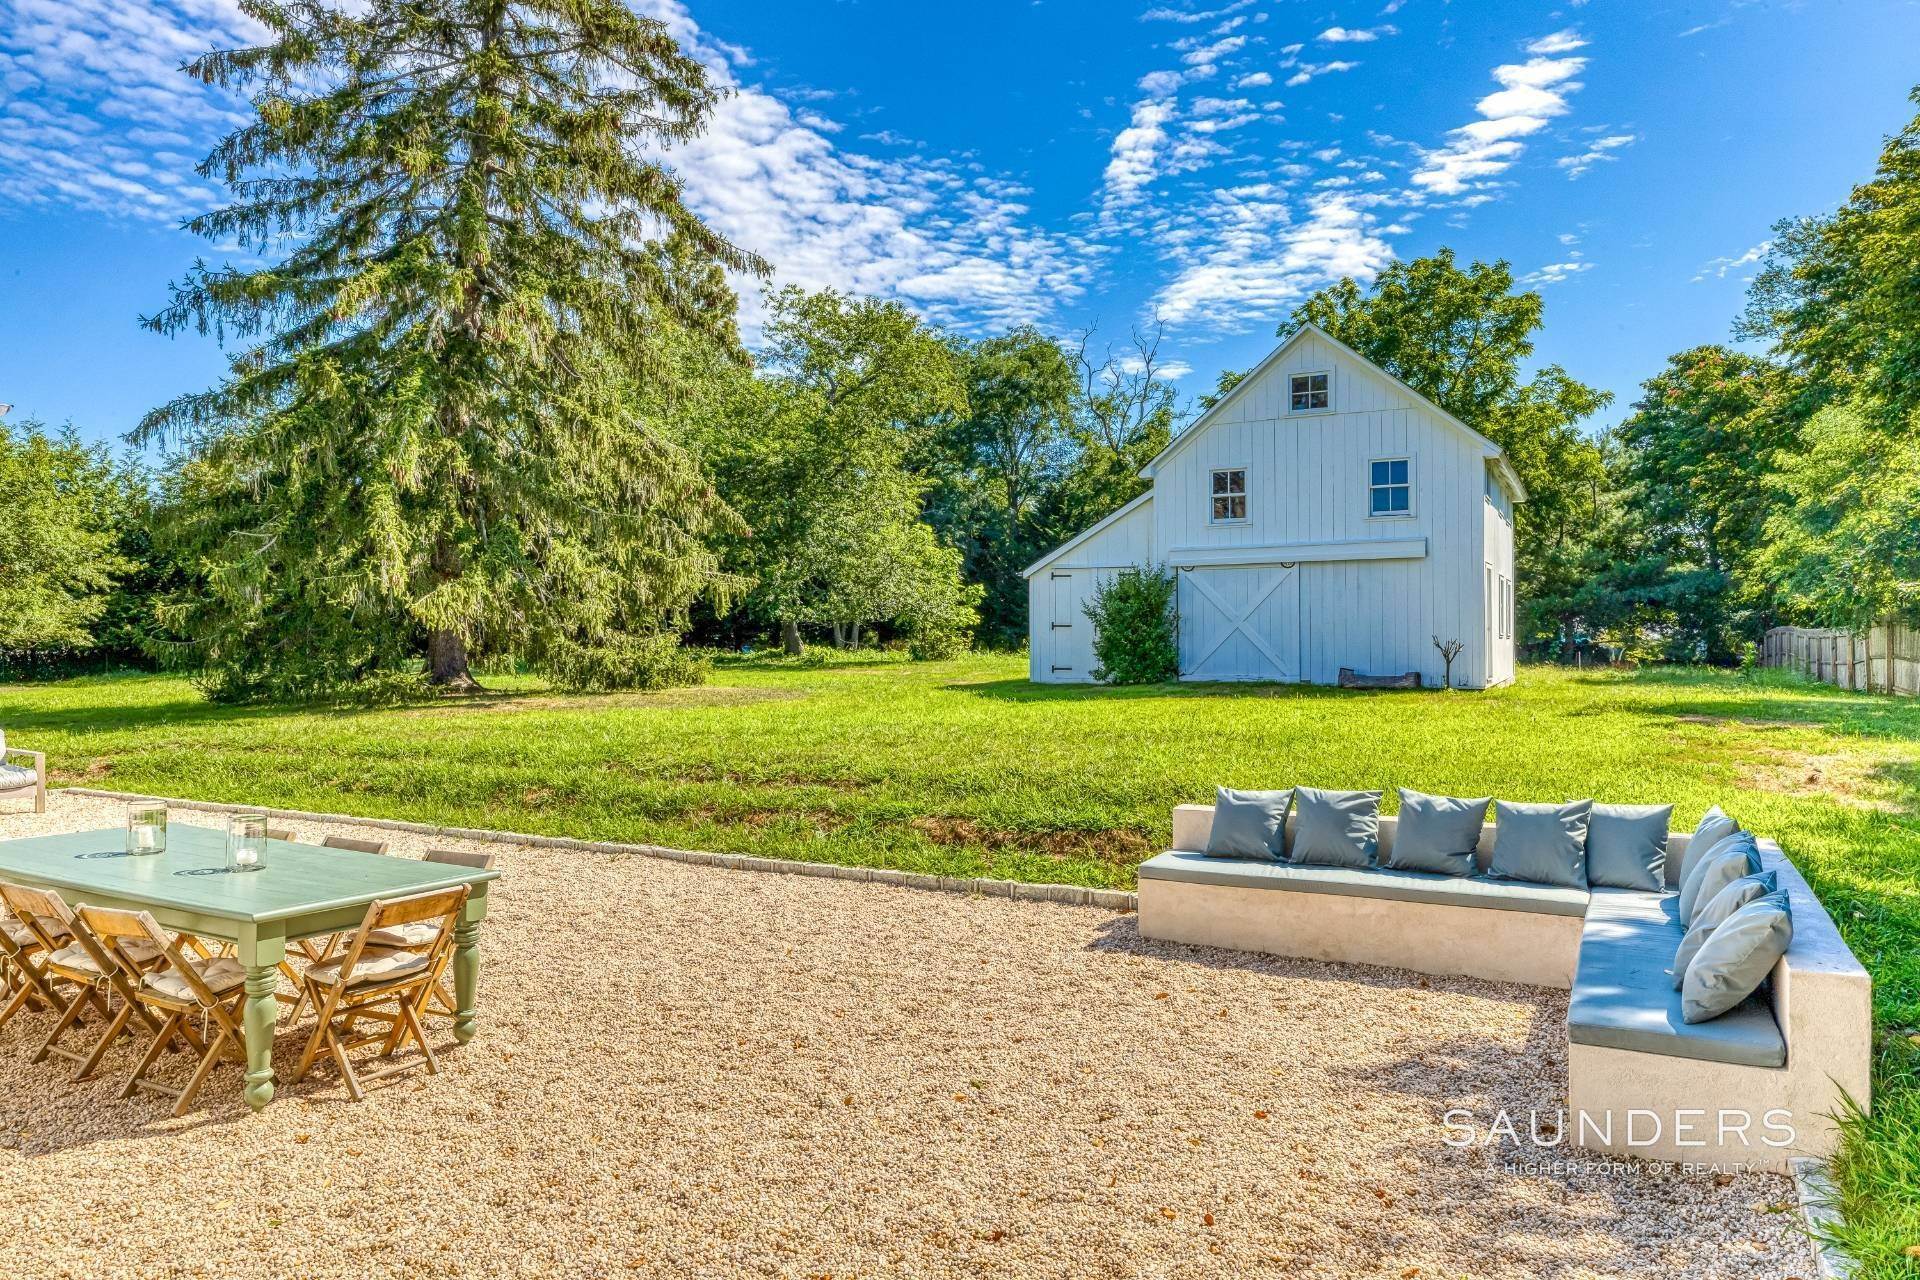 7. Single Family Homes for Sale at Shelter Island Restored 1900 Farmhouse With Barn 9 Sunshine Road, Shelter Island, NY 11964